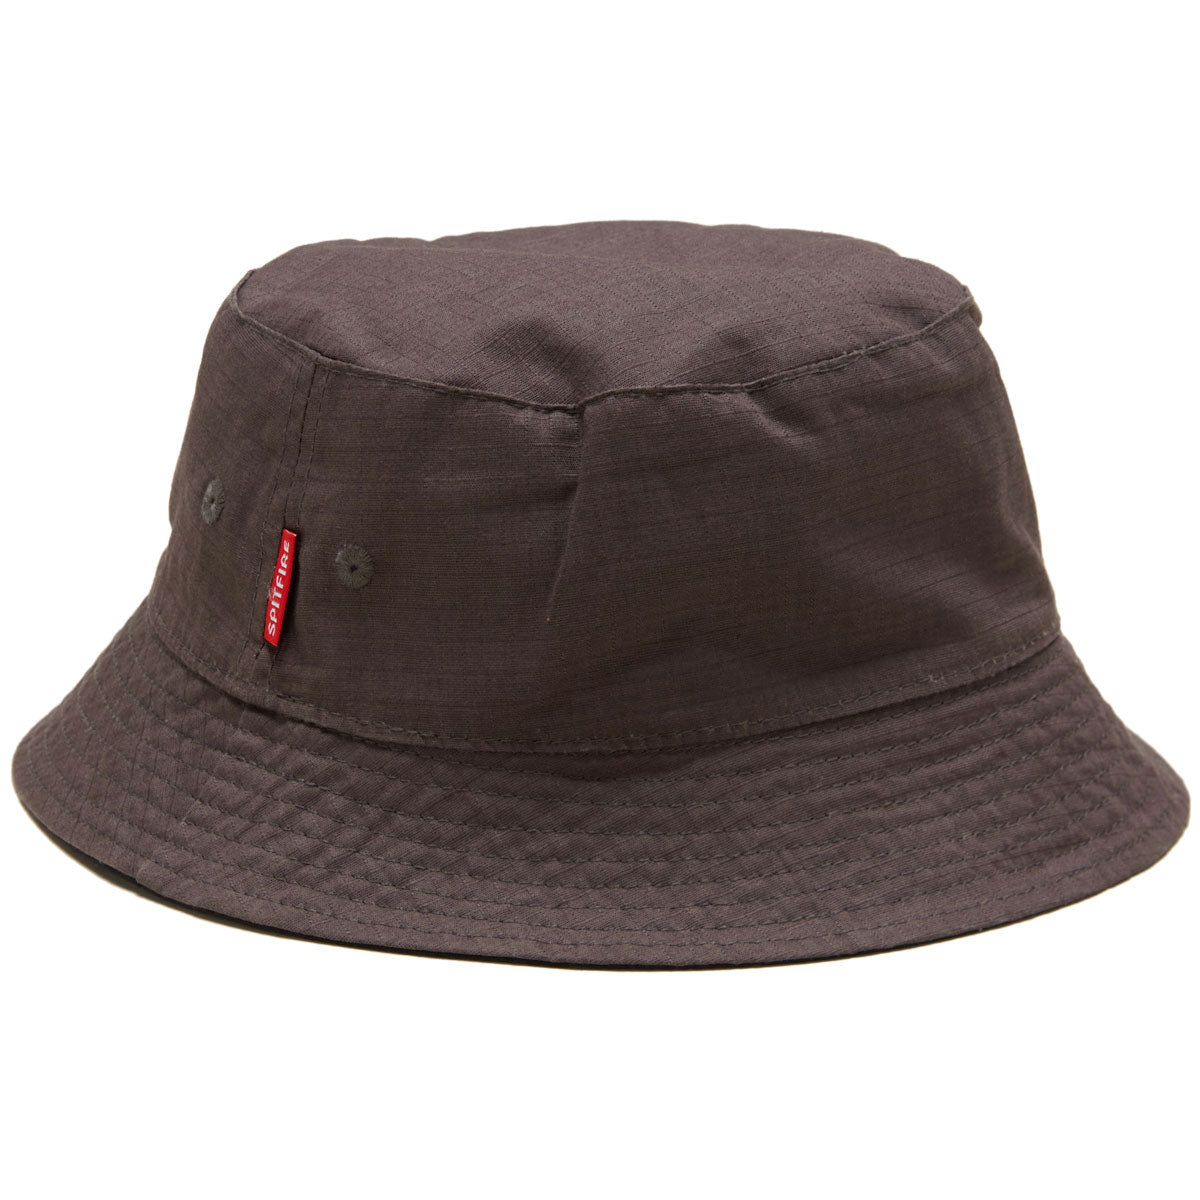 Spitfire Classic 87 Reversible Hat - Charcoal/Black image 3